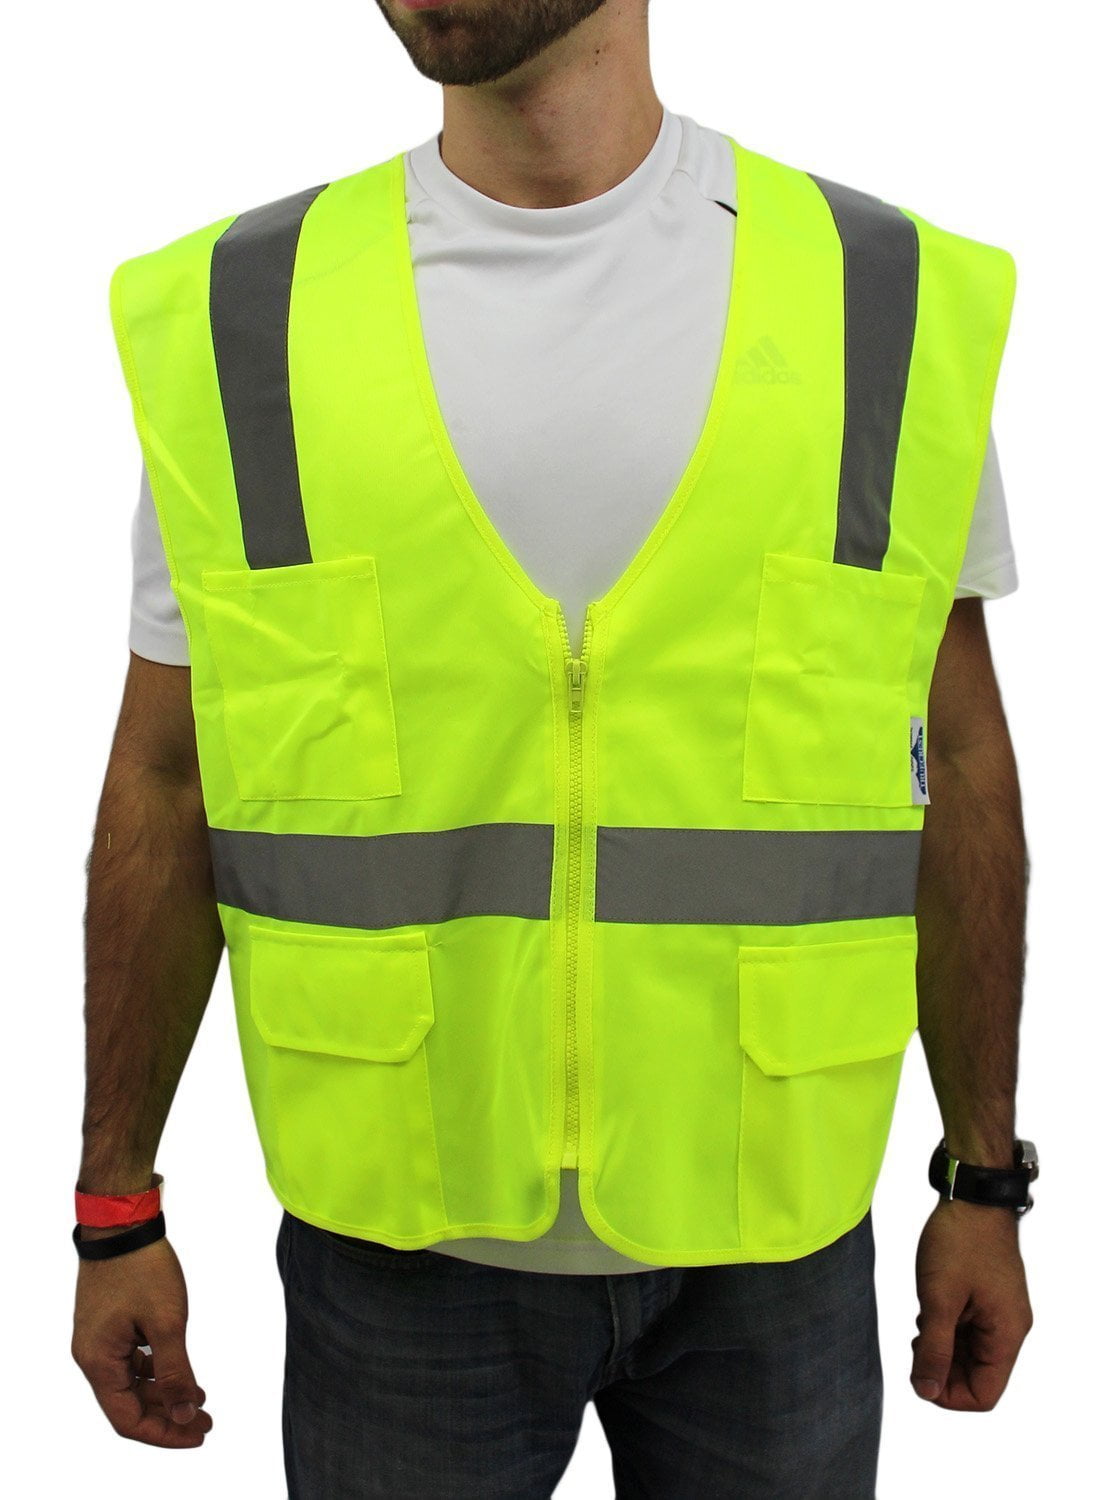 Reflective 4 Pockets XL Large Lime Yellow Safety Vest ANSI CLASS 2 US Shipper 